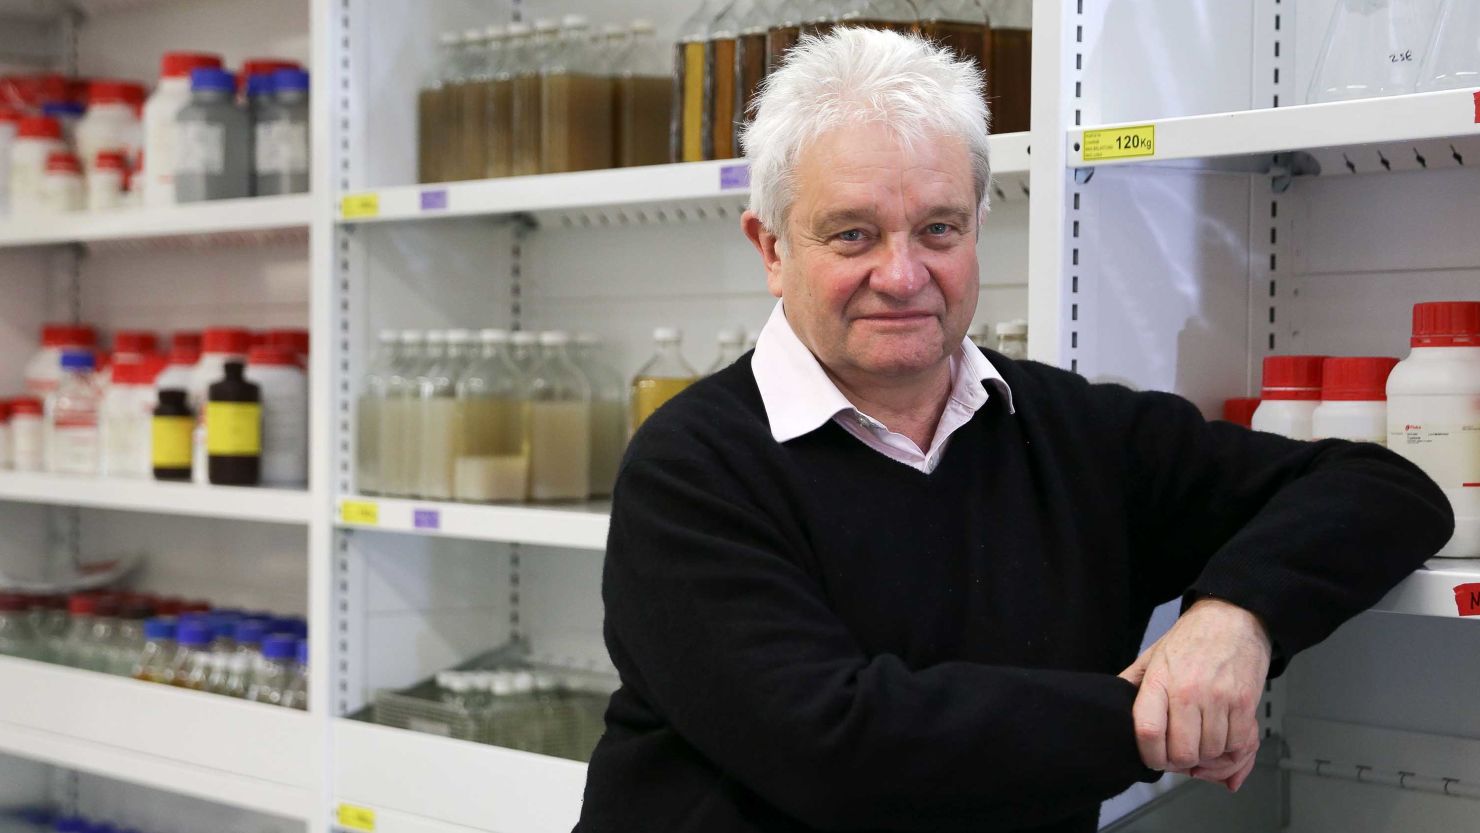 Nobel-winning director Paul Nurse poses for a photograph inside one of his labs inside the new Francis Crick Institute building in London on September 1, 2016.